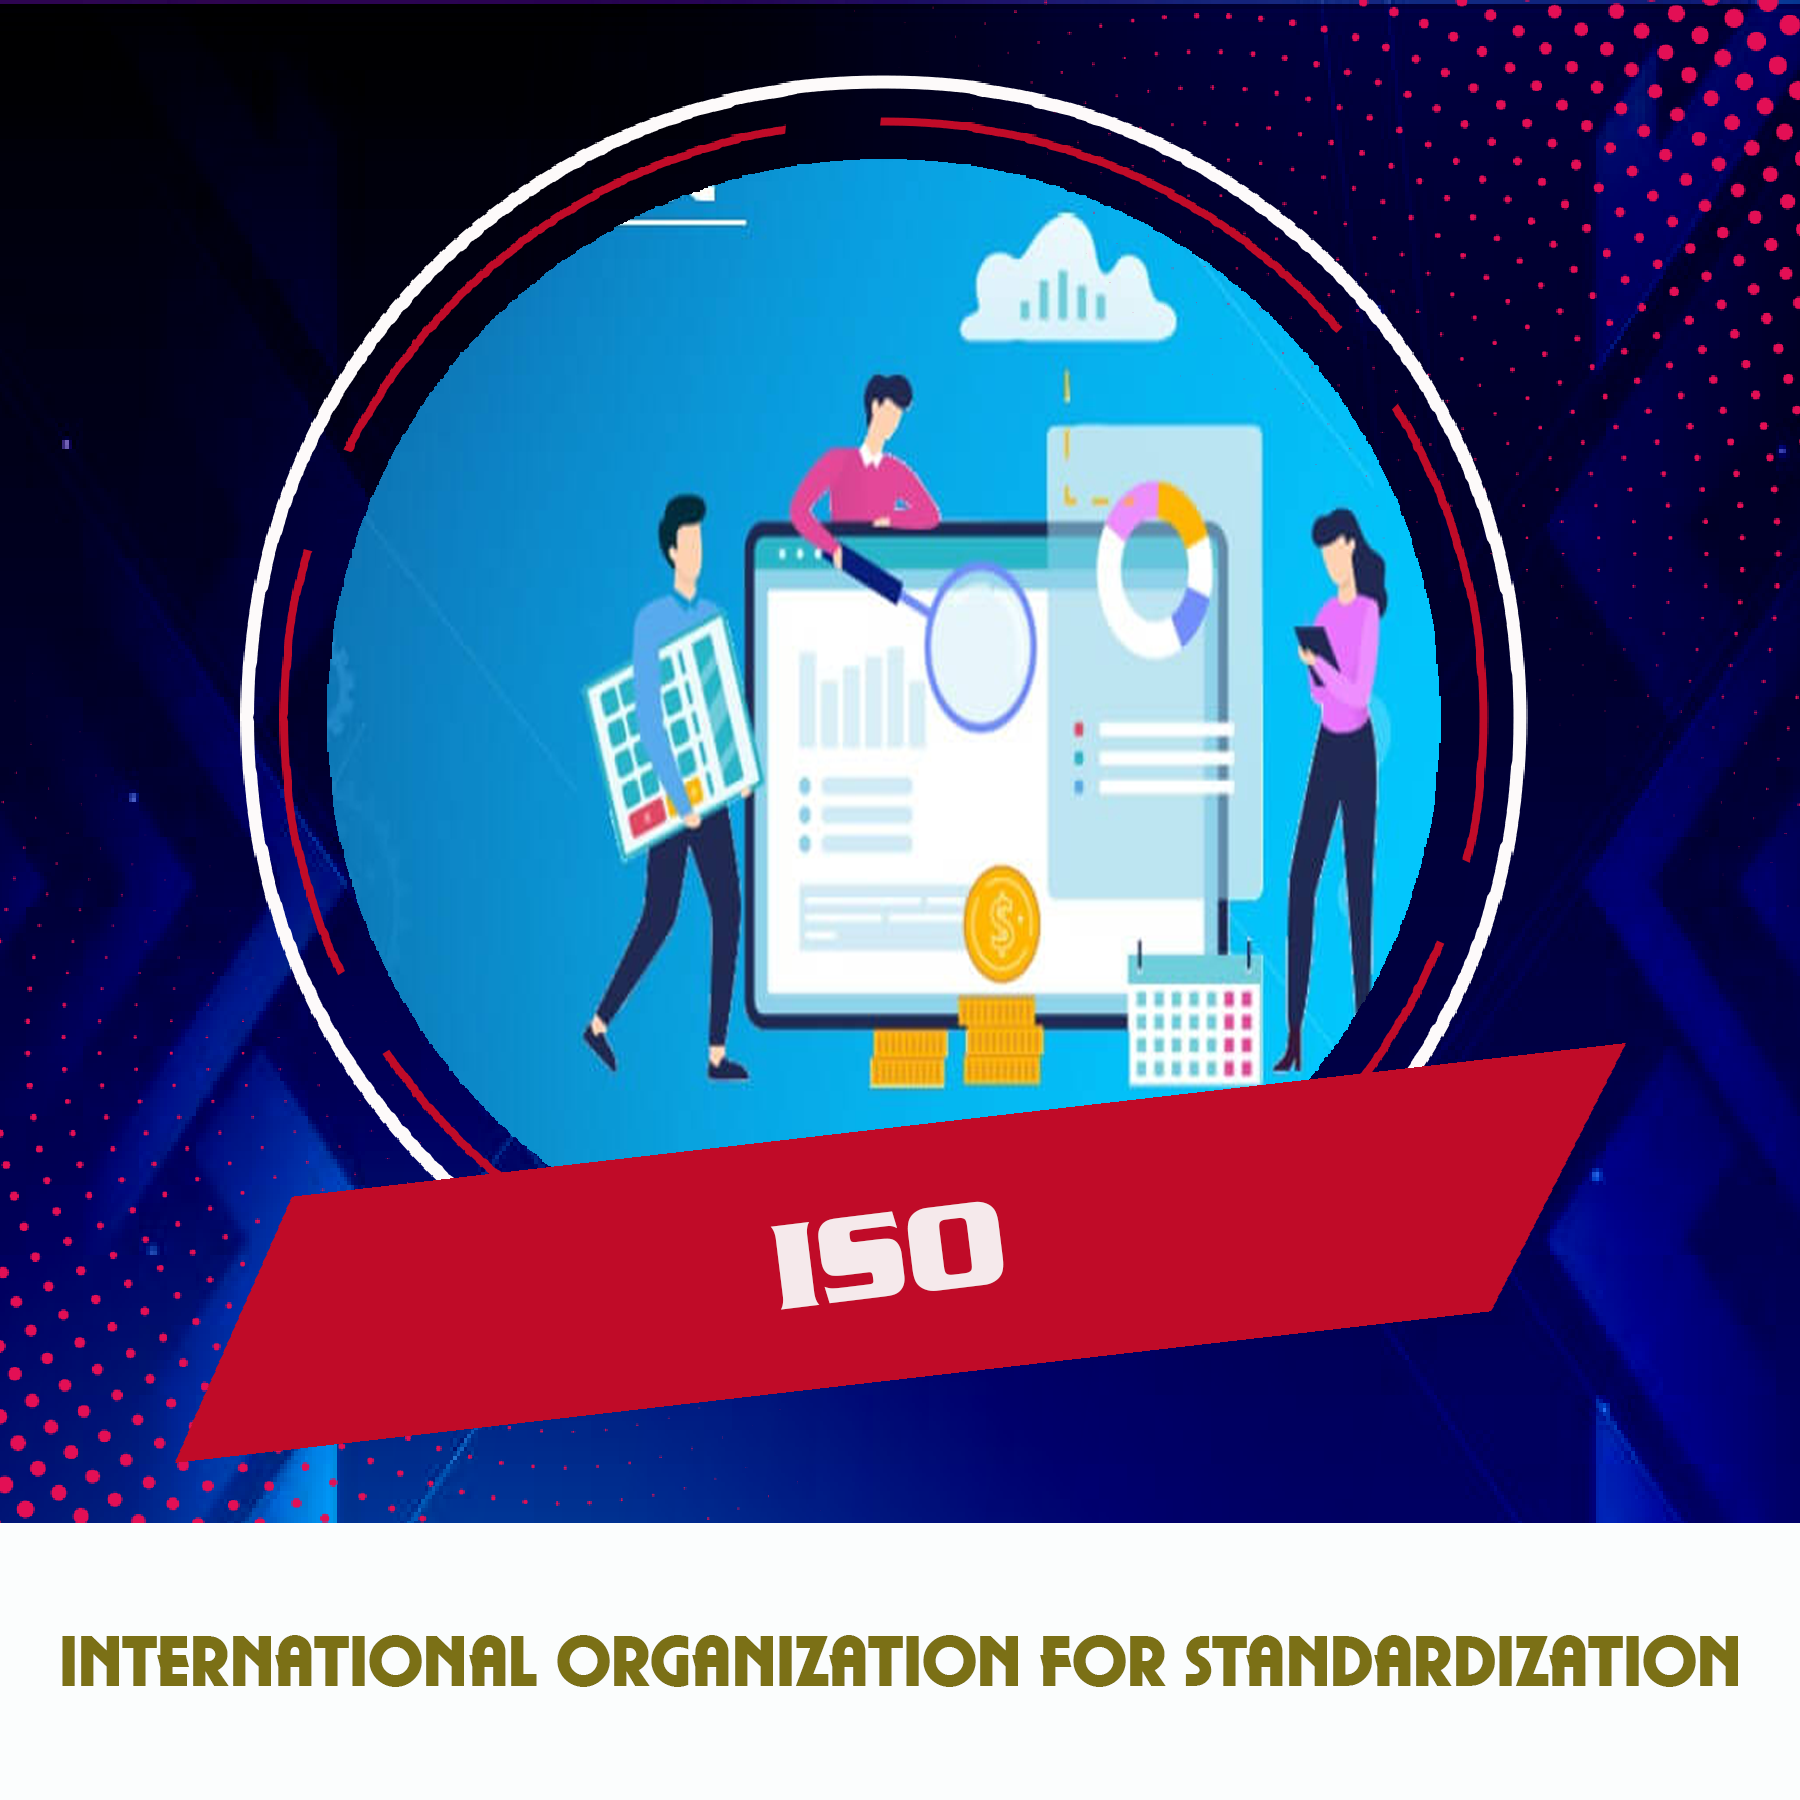 ISO CERTIFICATION OFFERS THE FOLLOWING BENEFITS